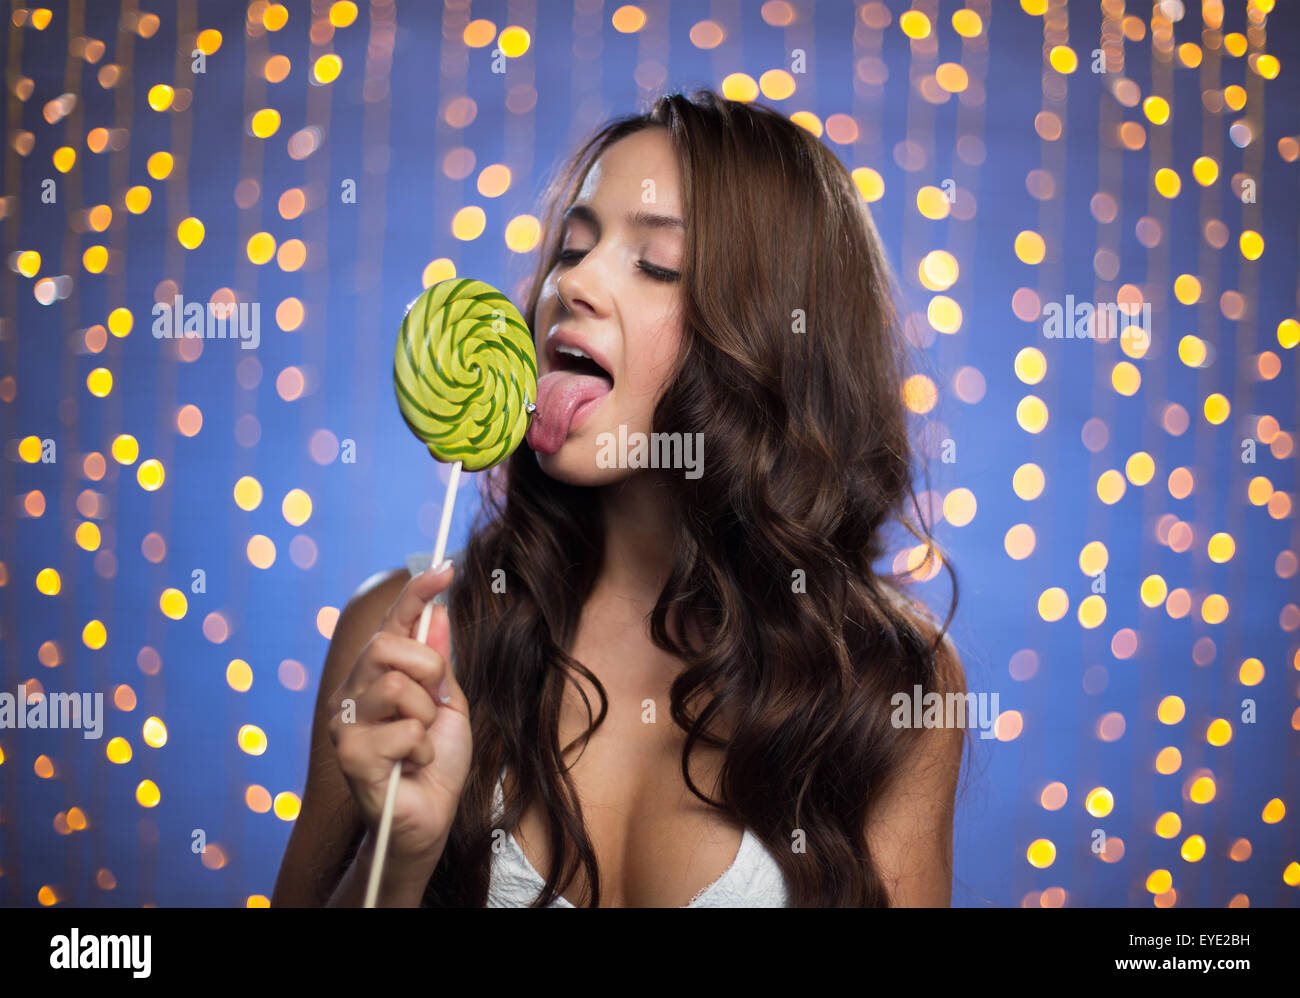 Pretty girl with long hair licking lollipop Stock Photo